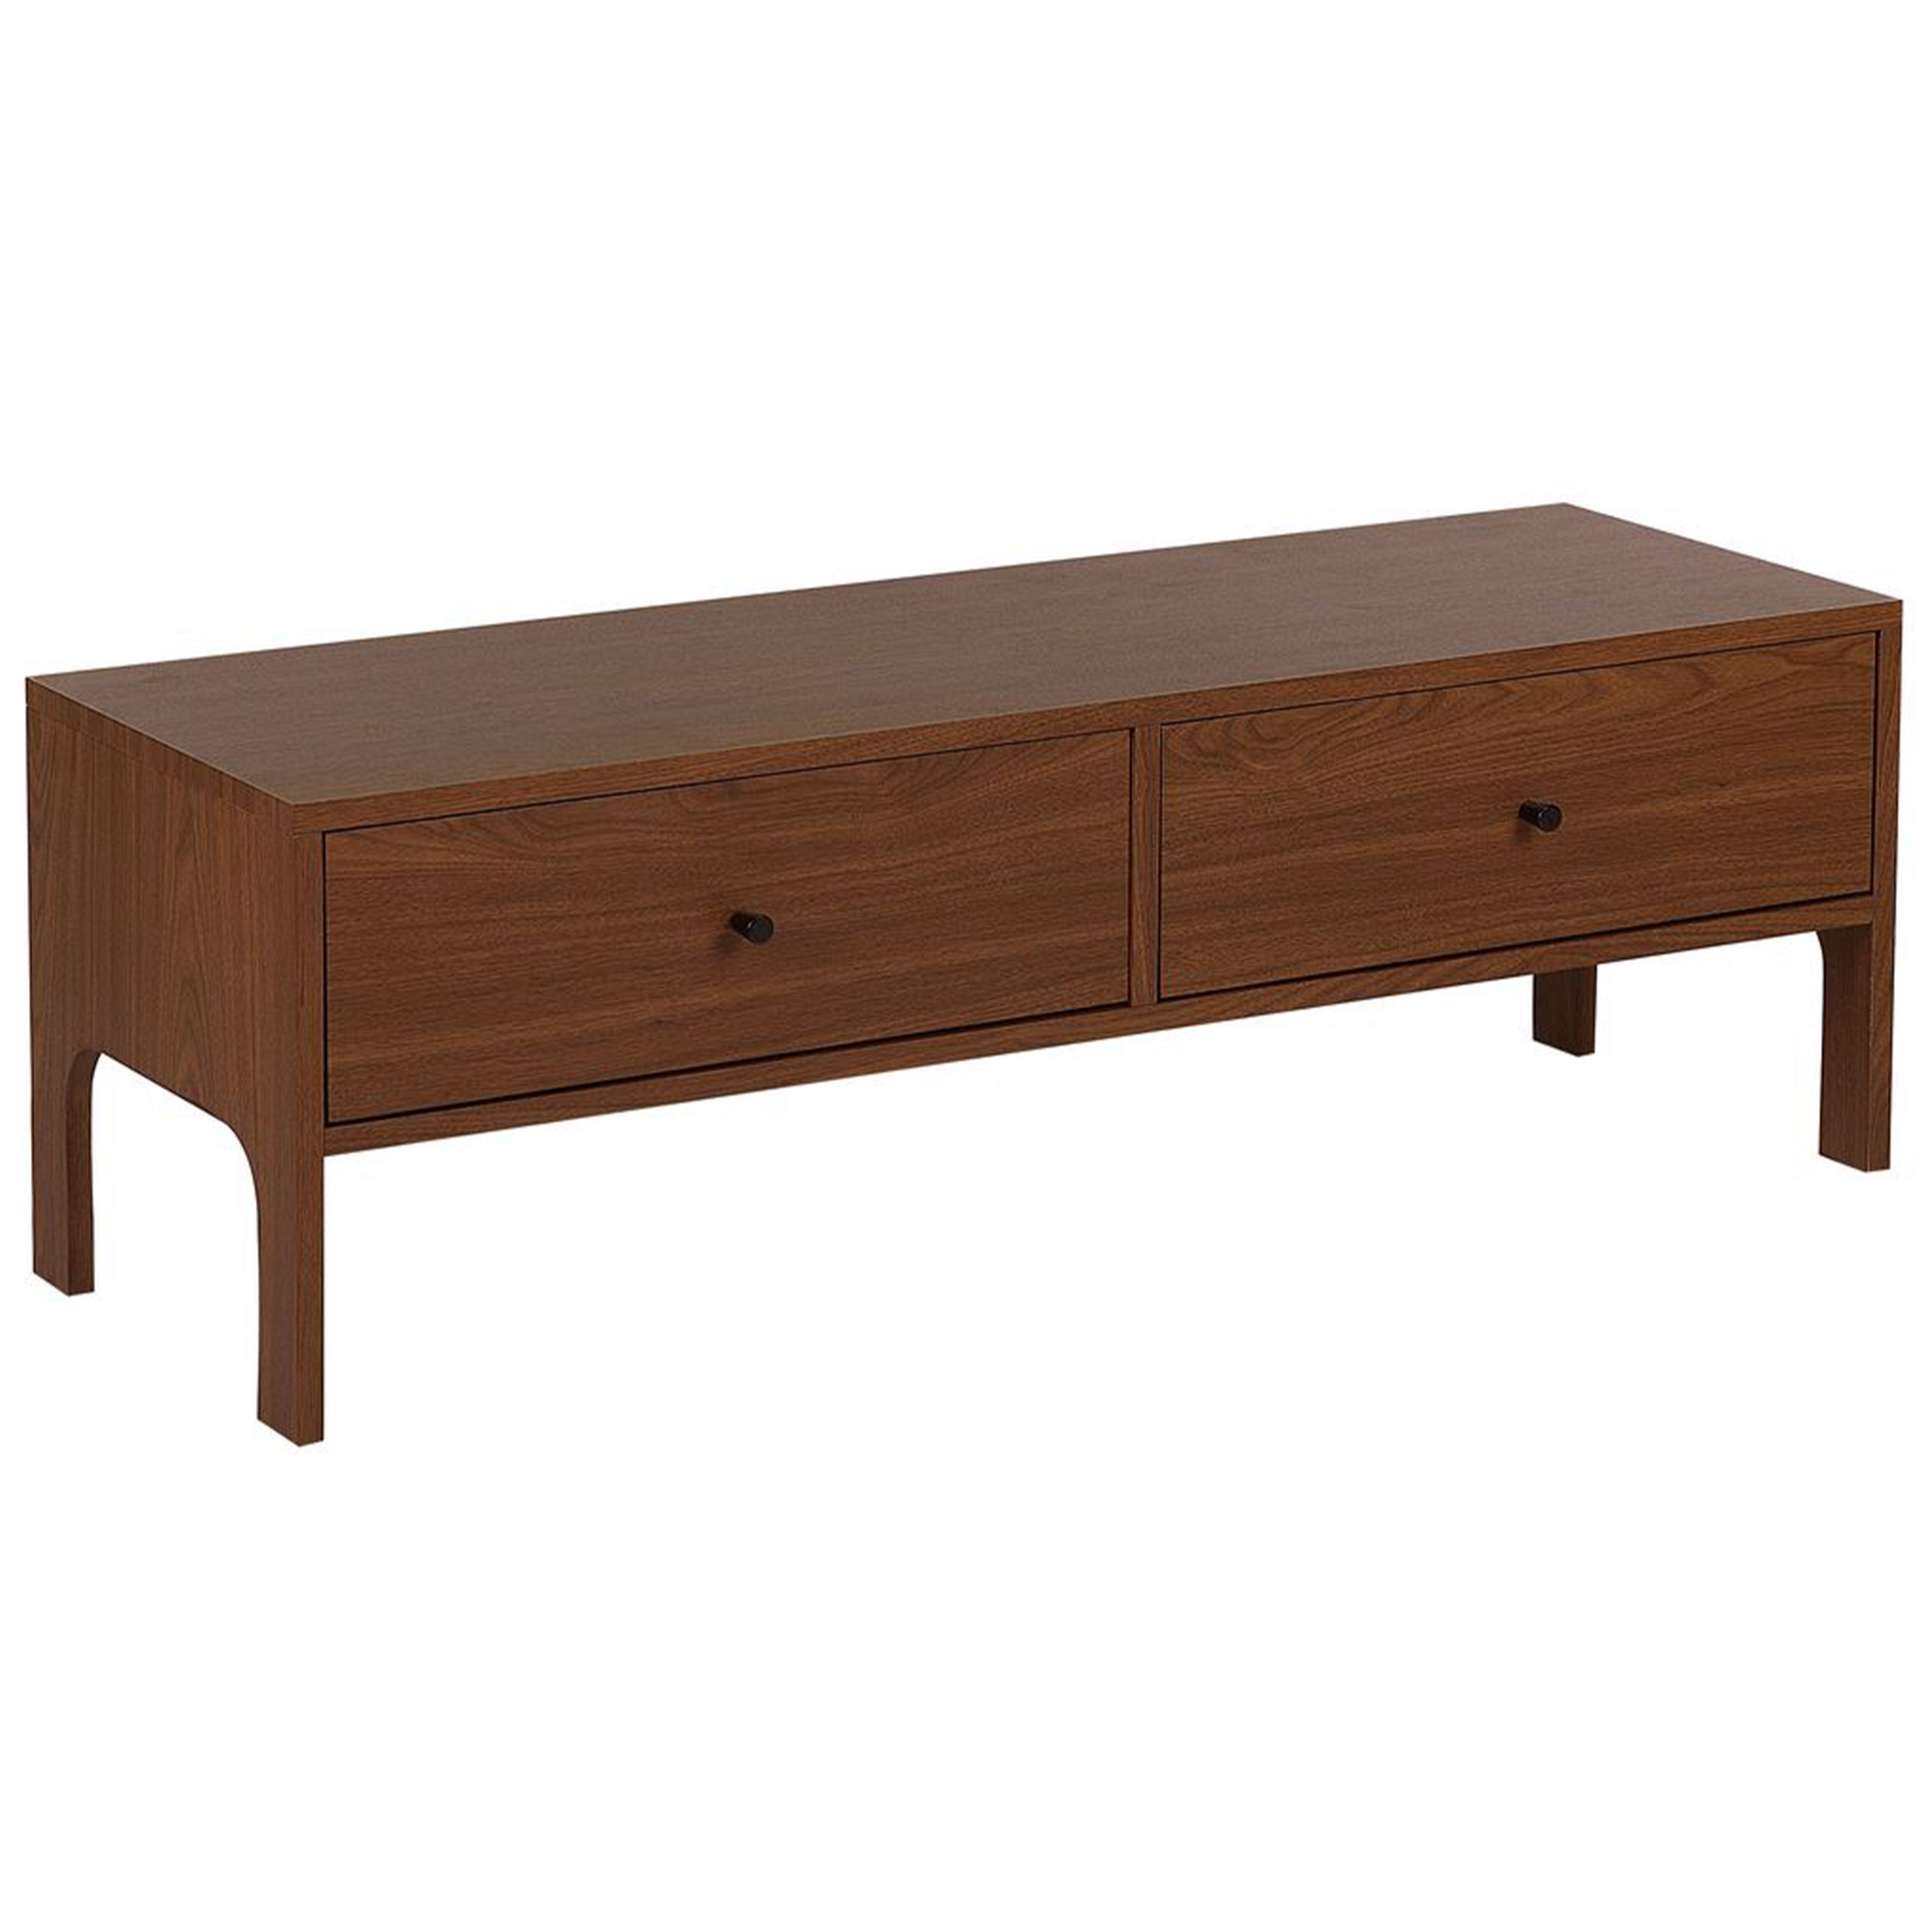 Beliani TV Stand Dark Wood Up To 54ʺ TV Recommended 2 Drawers Storage Retro